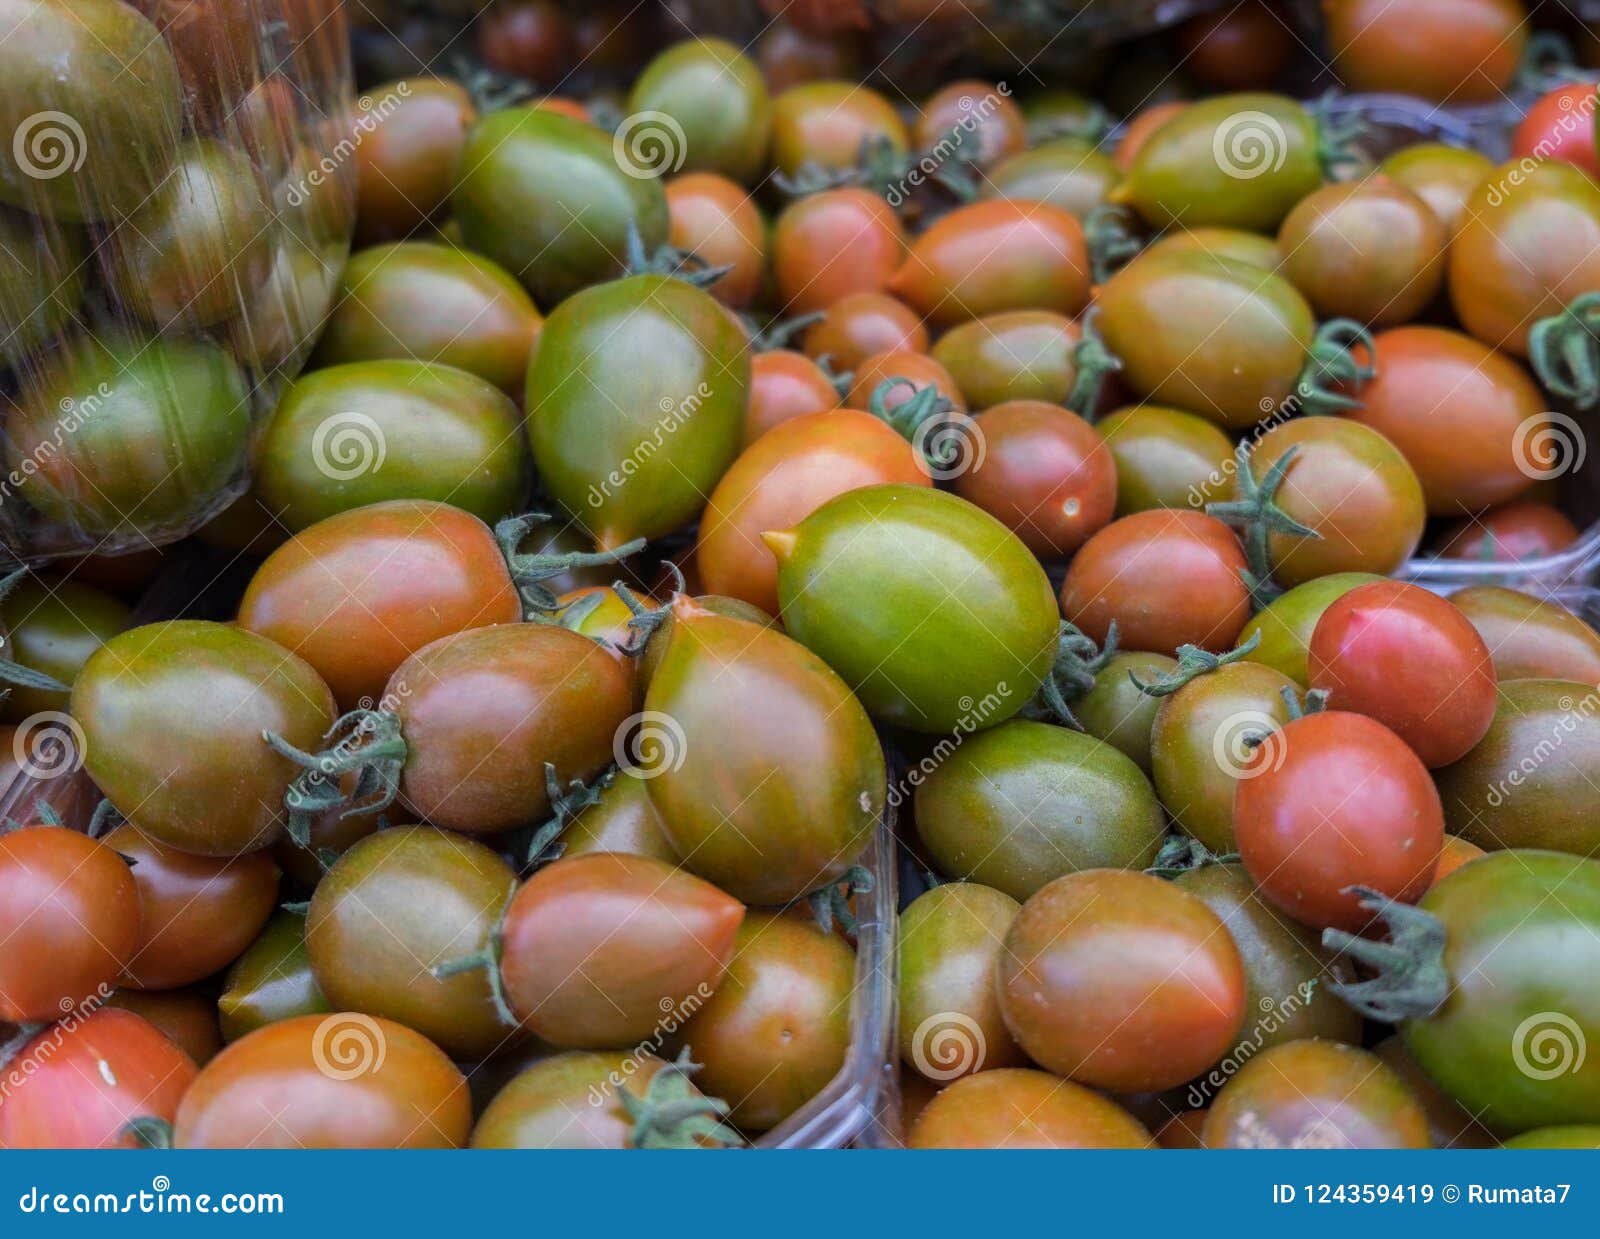 Organics Red and Green Cherry Tomatoes at City Market Stock Image ...